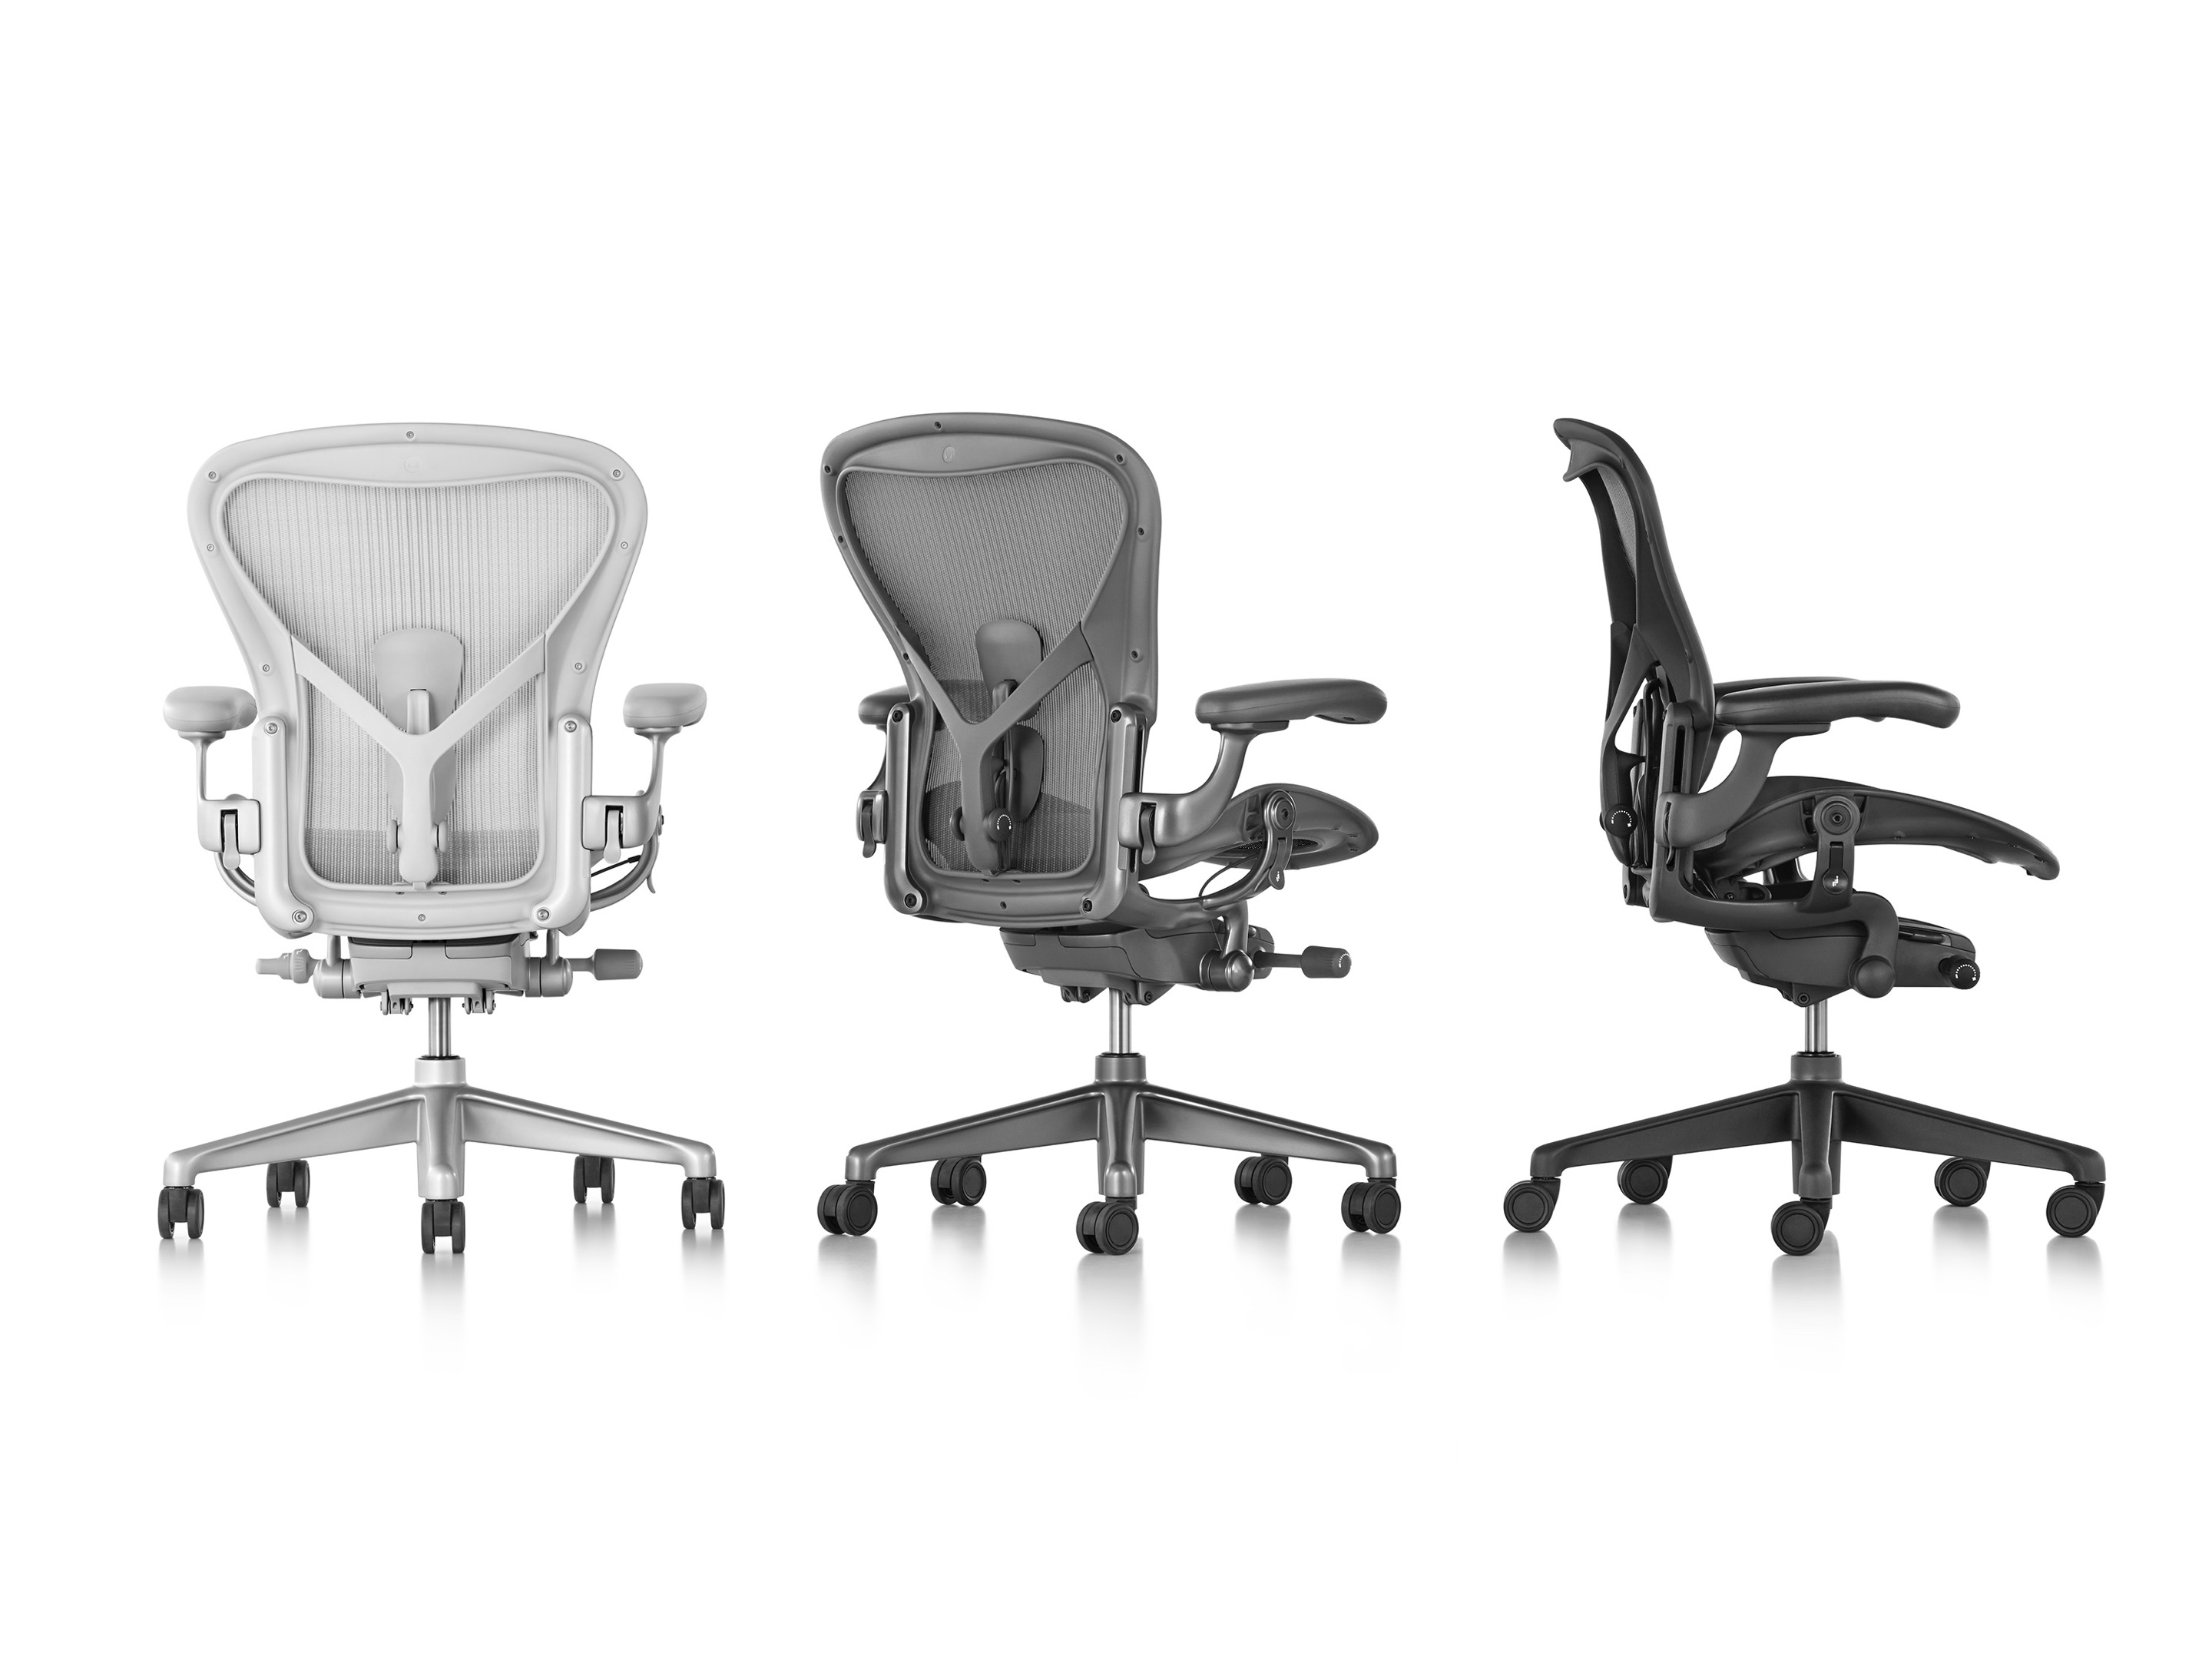 Extensive of the Miller Aeron Task Chair - Office